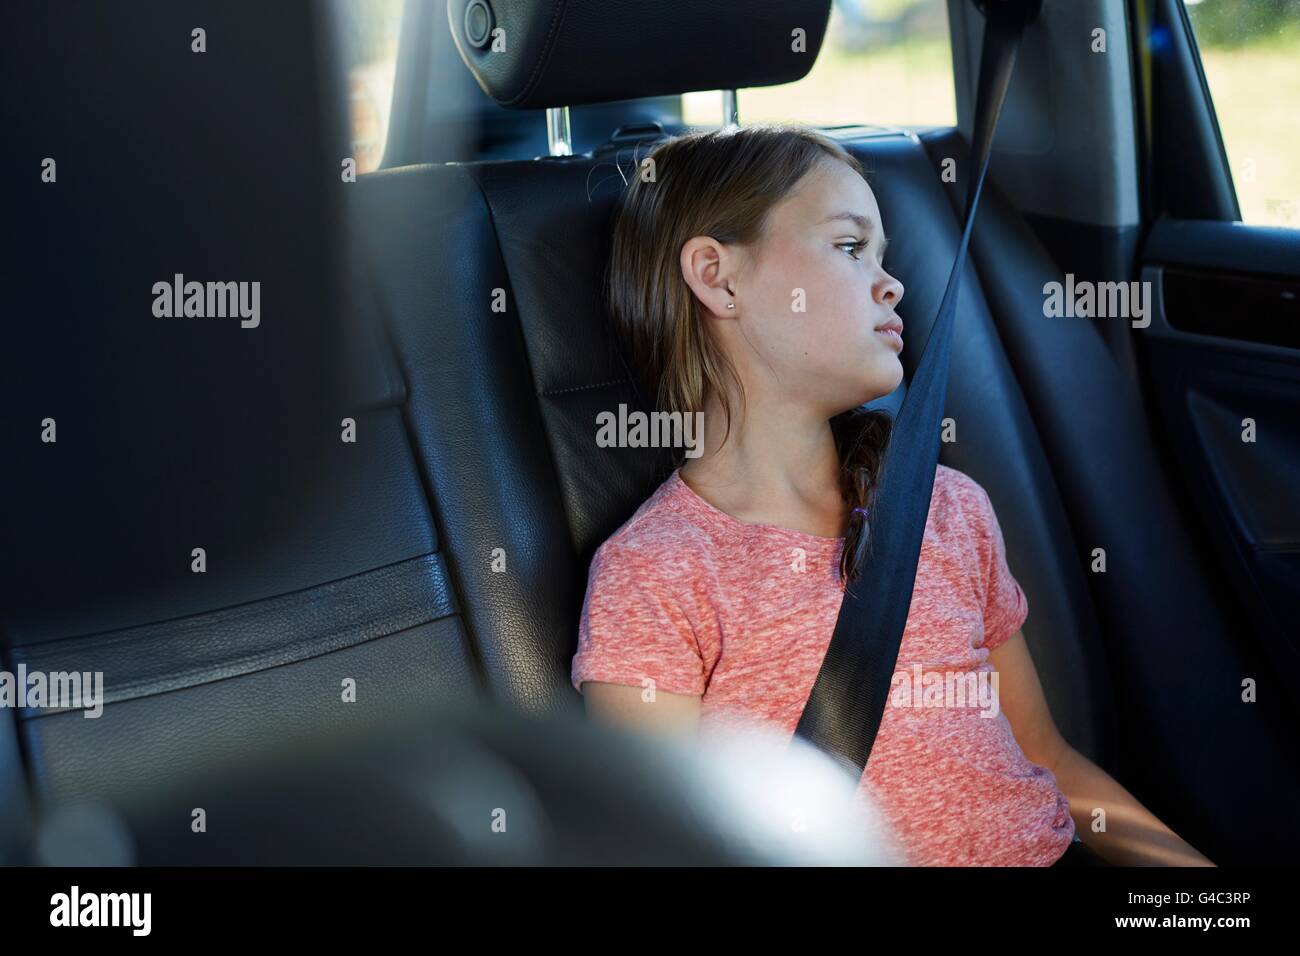 MODEL RELEASED. Girl in the back seat of the car wearing seat belt. Stock Photo